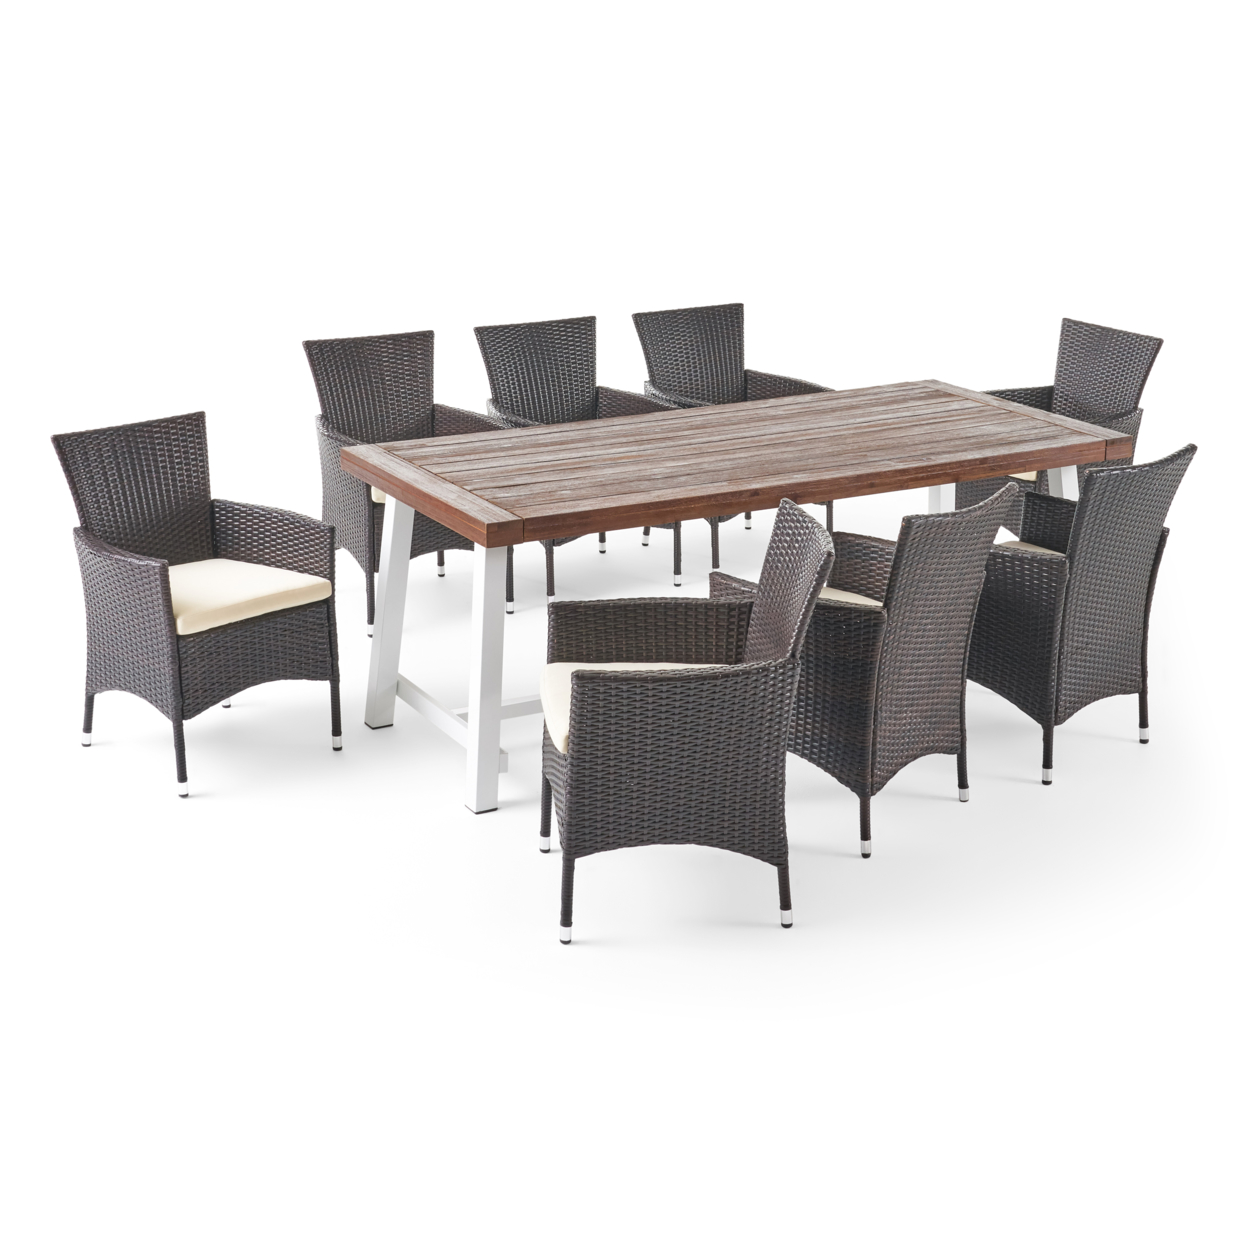 Mayson Outdoor Wood And Wicker 8 Seater Dining Set - Dark Brown, White, Multibrown, Beige